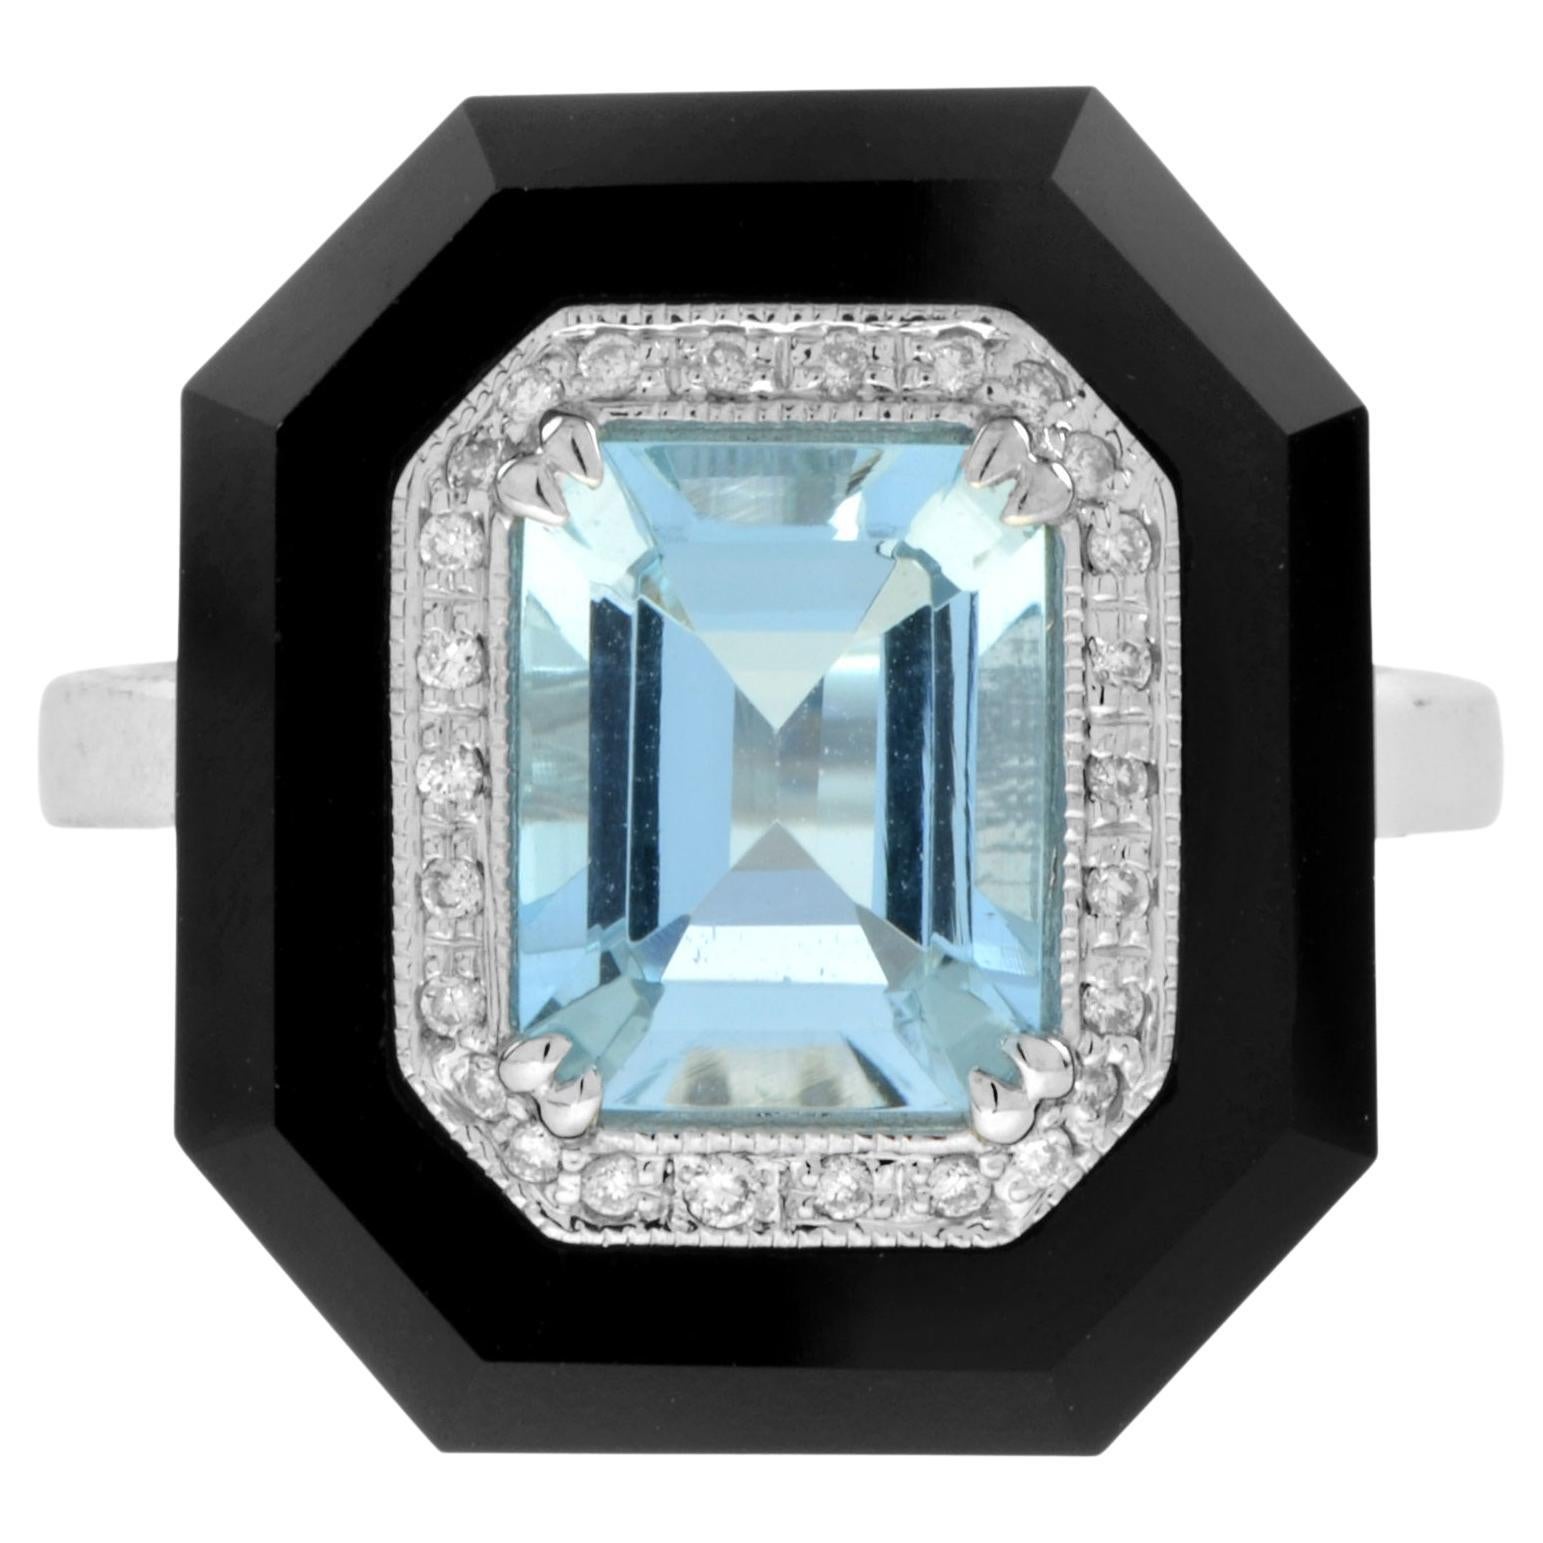 Cassiopeia Art Deco Style Aquamarine with Diamond and Onyx Ring in 18K Gold